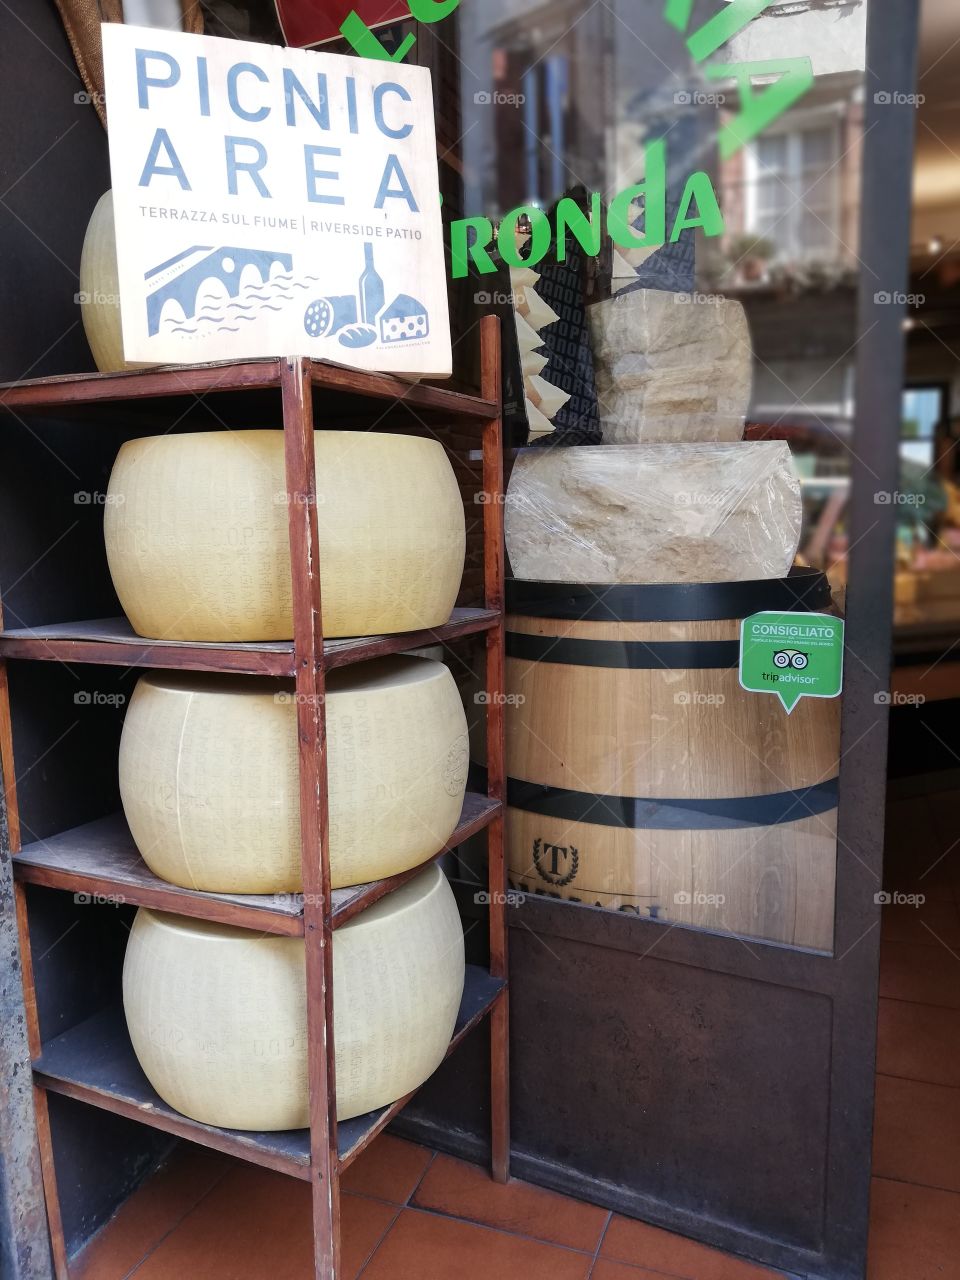 Small shop with large forms of Parmesan cheese